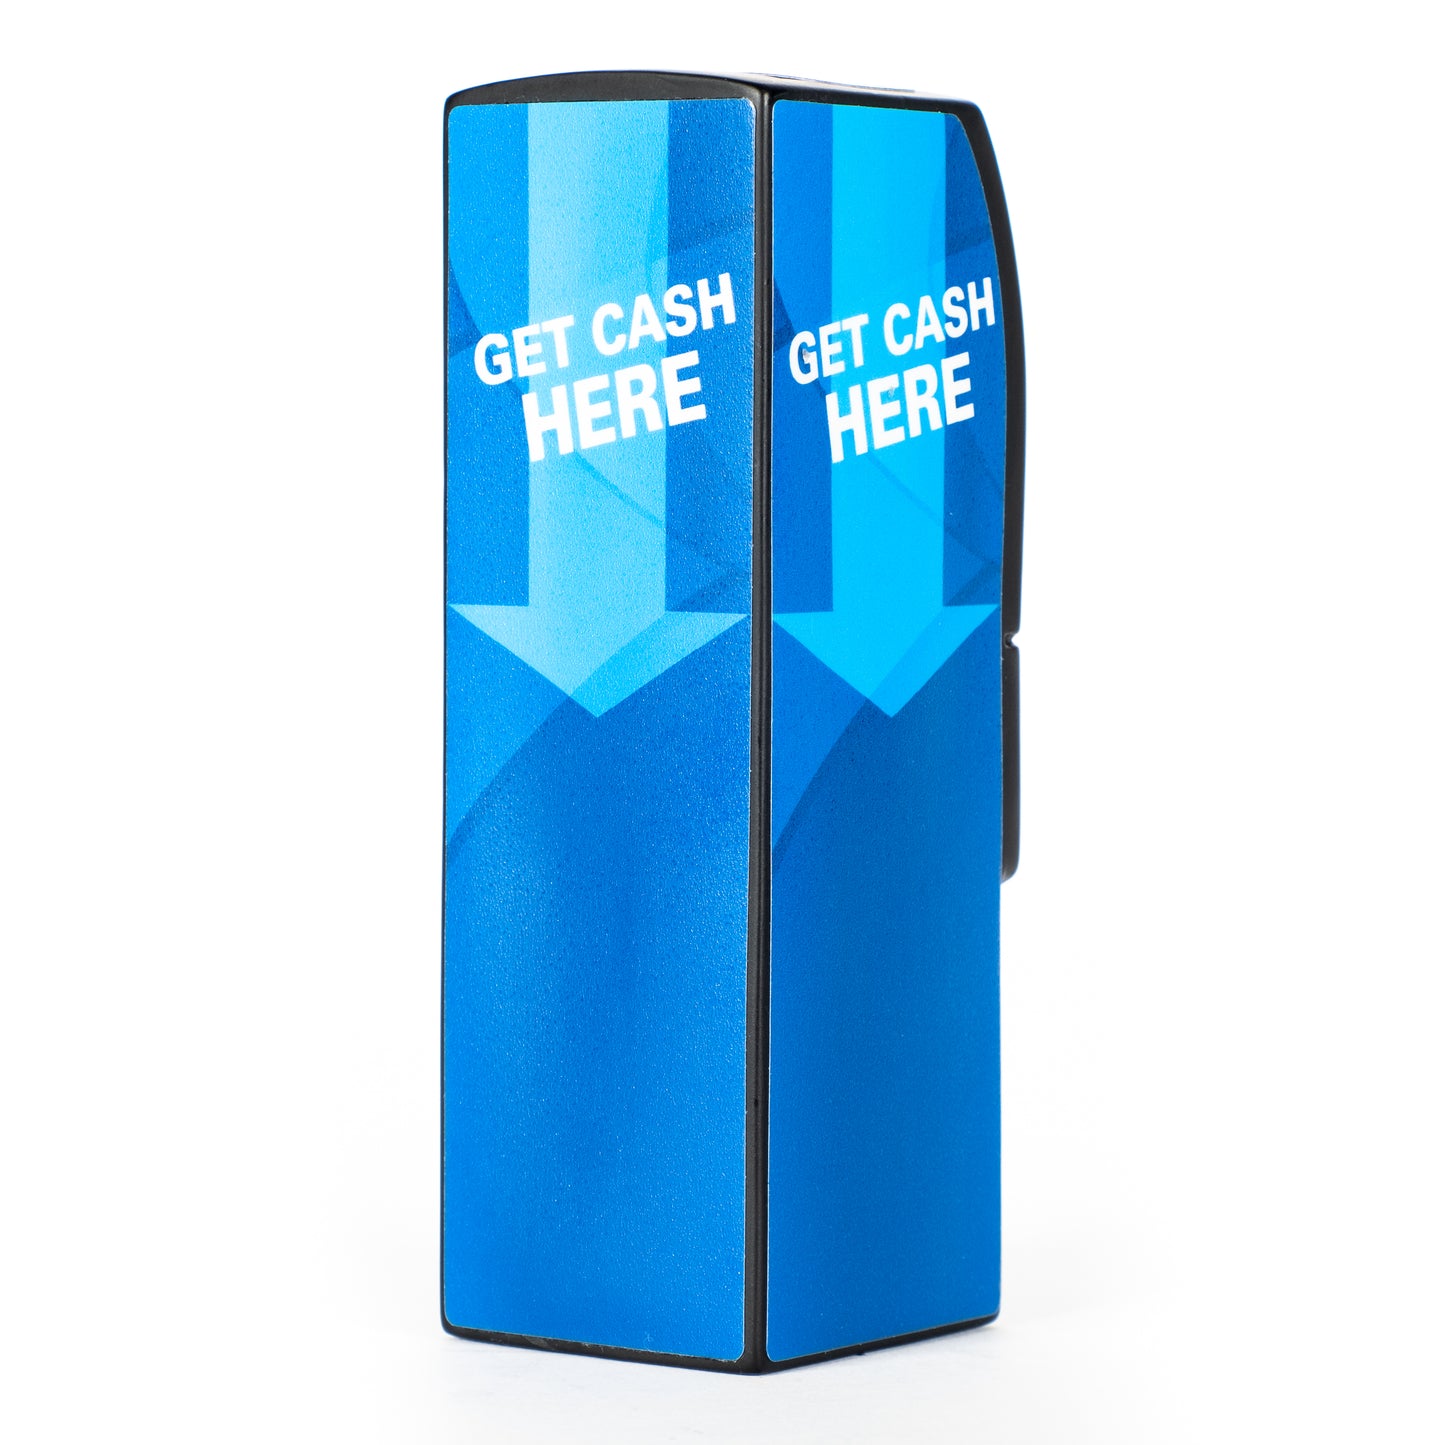 Isometric back view of Genmega 6000 ATM Scale Model Coin Bank with custom "Get Cash Here" wrap.